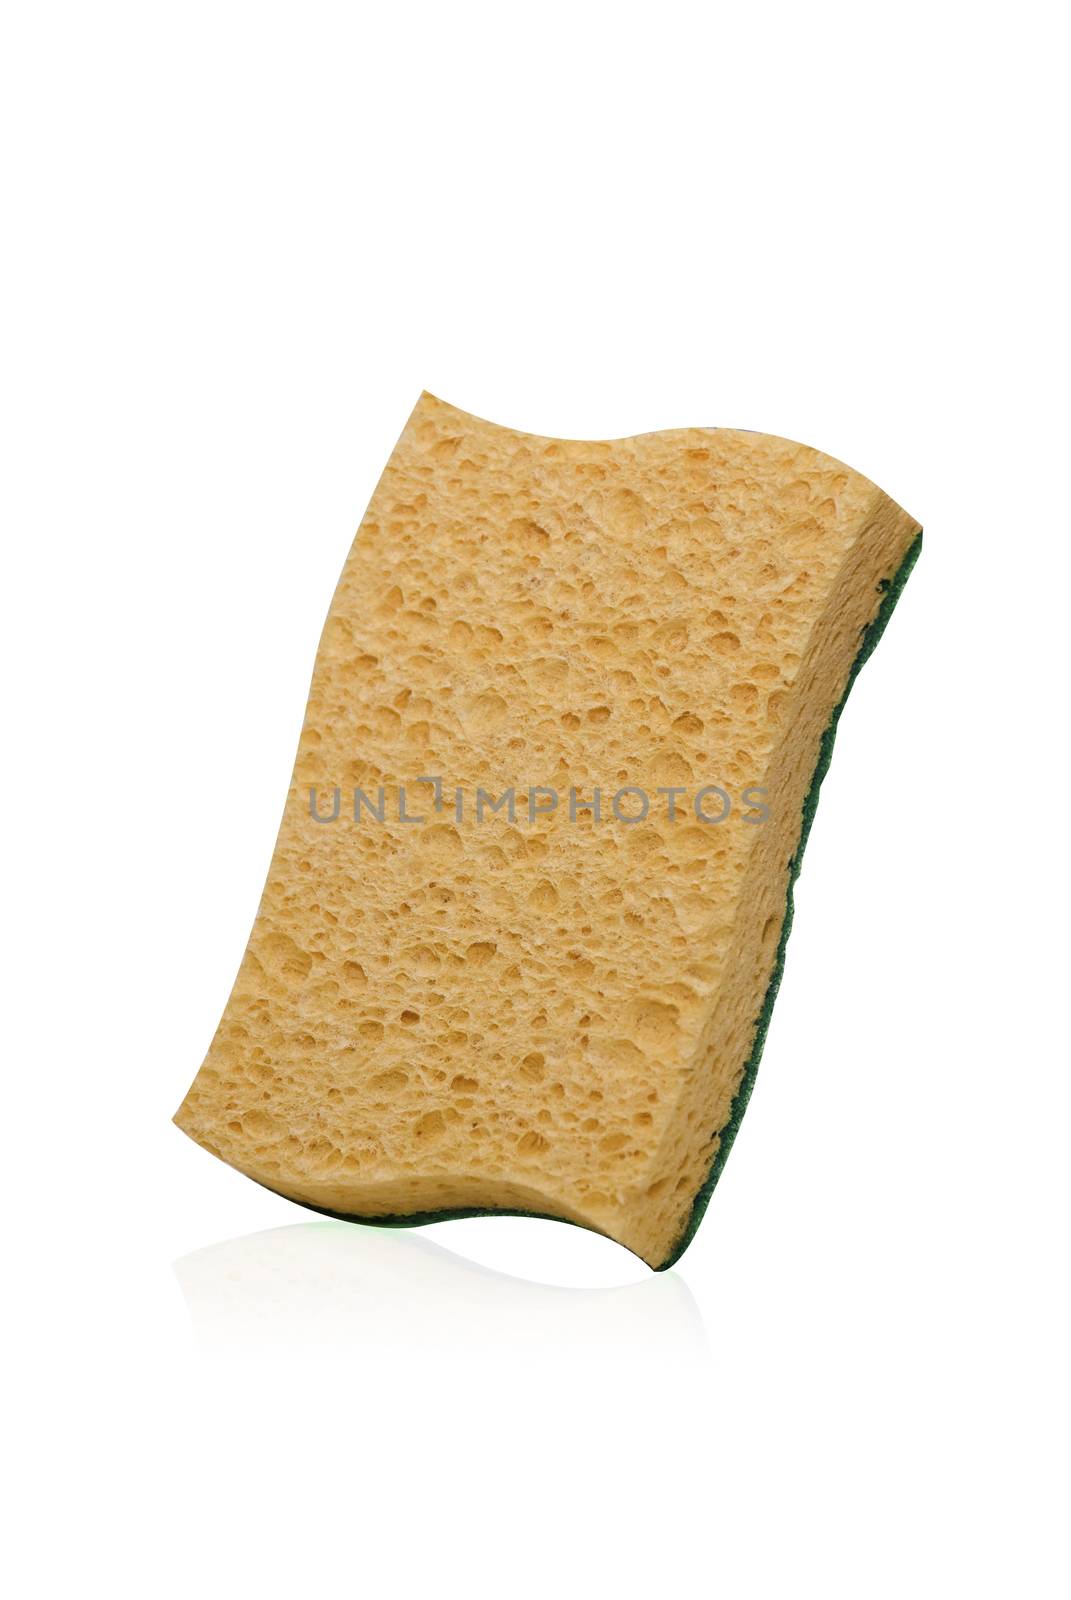 orange cellulose sponge with abrasive for cleaning kitchen